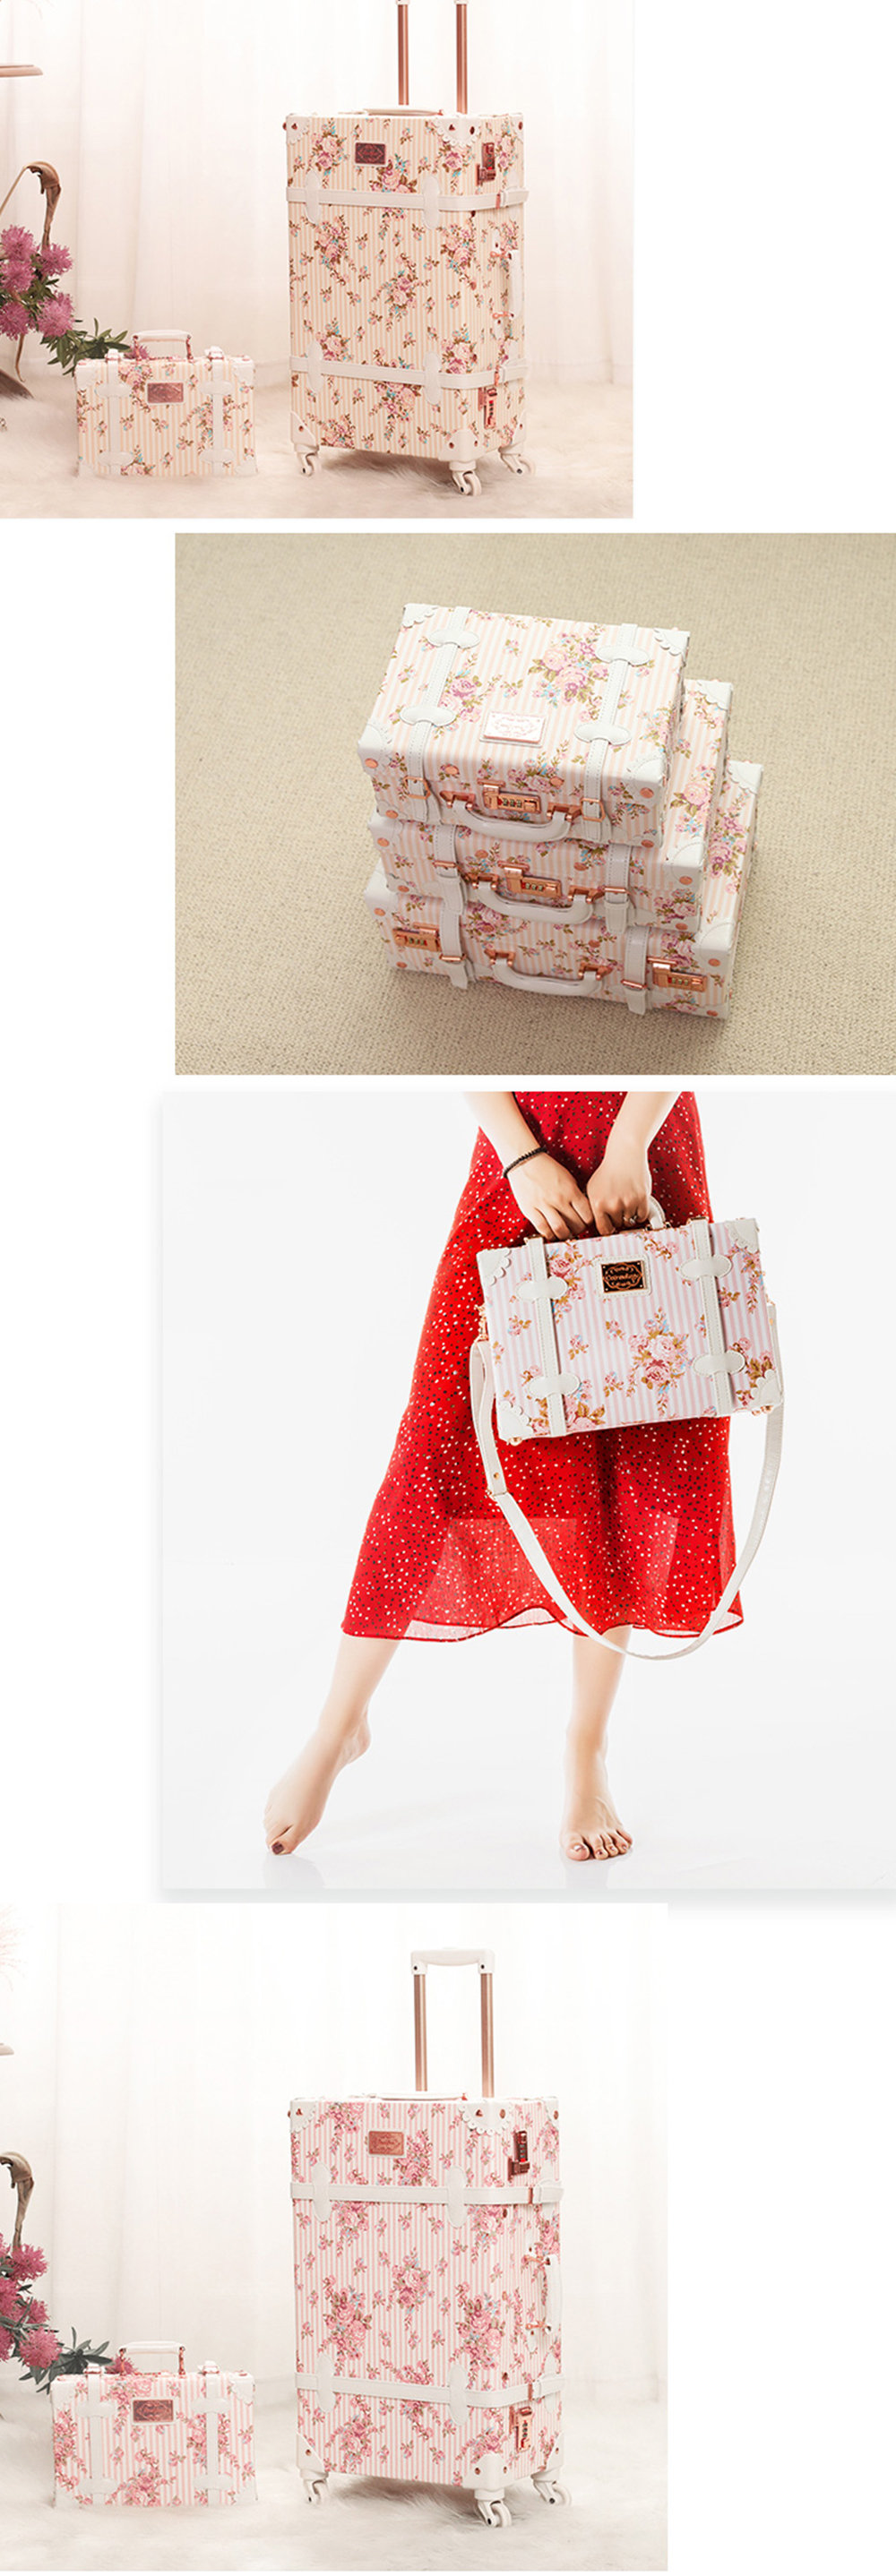  OUNONA Paperboard Suitcases Mini Suitcase Floral